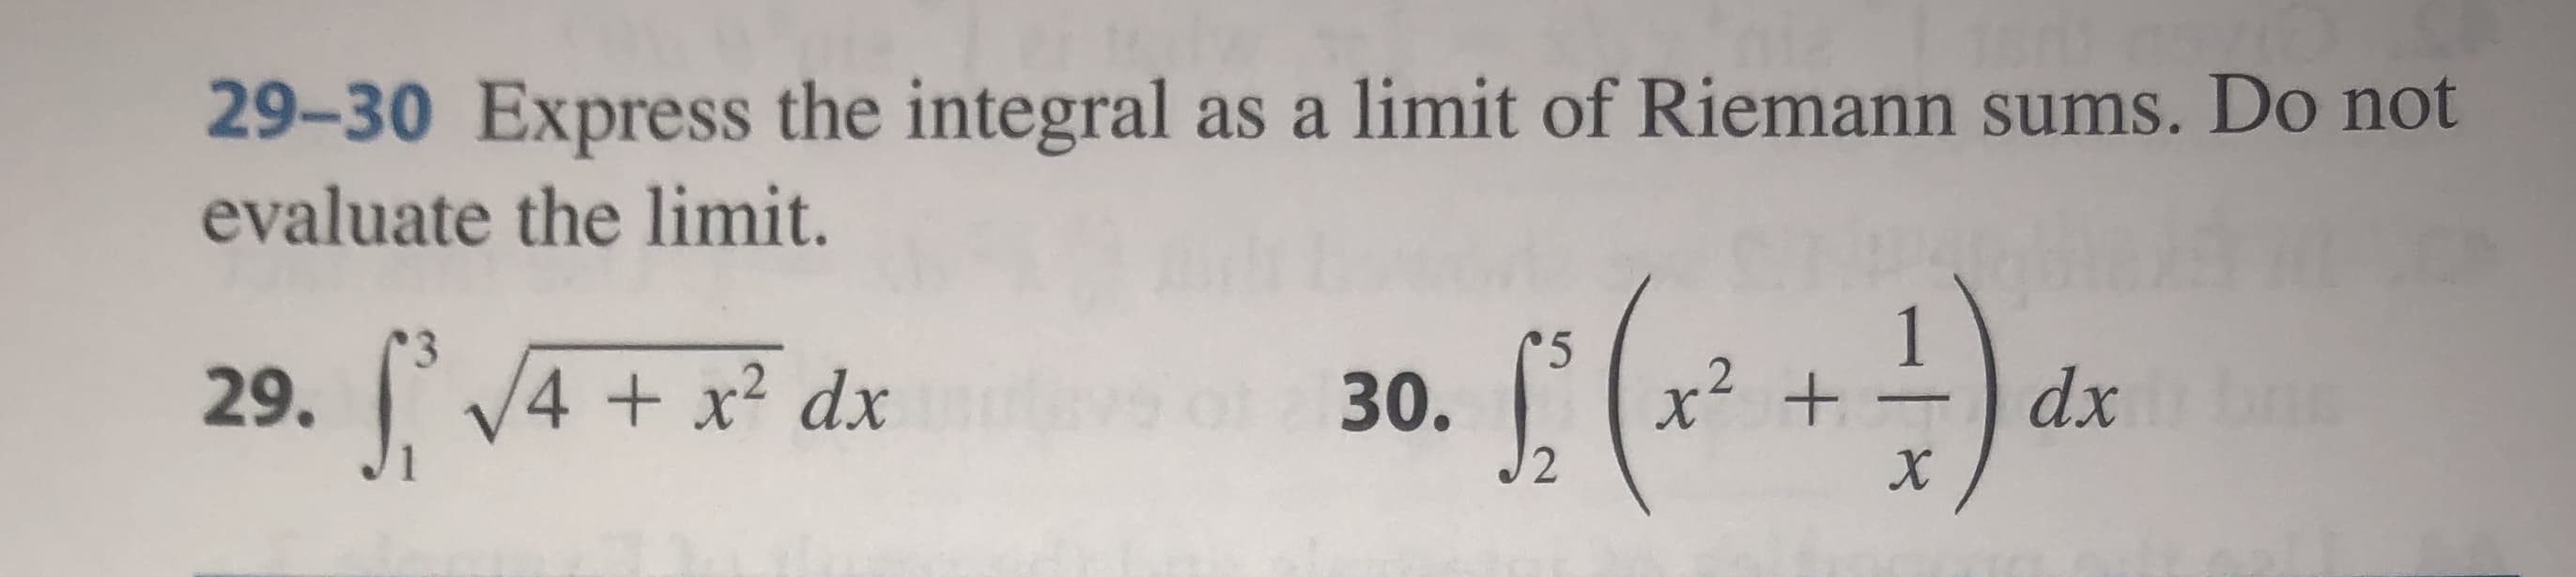 29-30 Express the integral as a limit of Riemann sums. Do not
evaluate the limit.
1
dx
3
5
xt
2
29. 4x2 dx
30.
